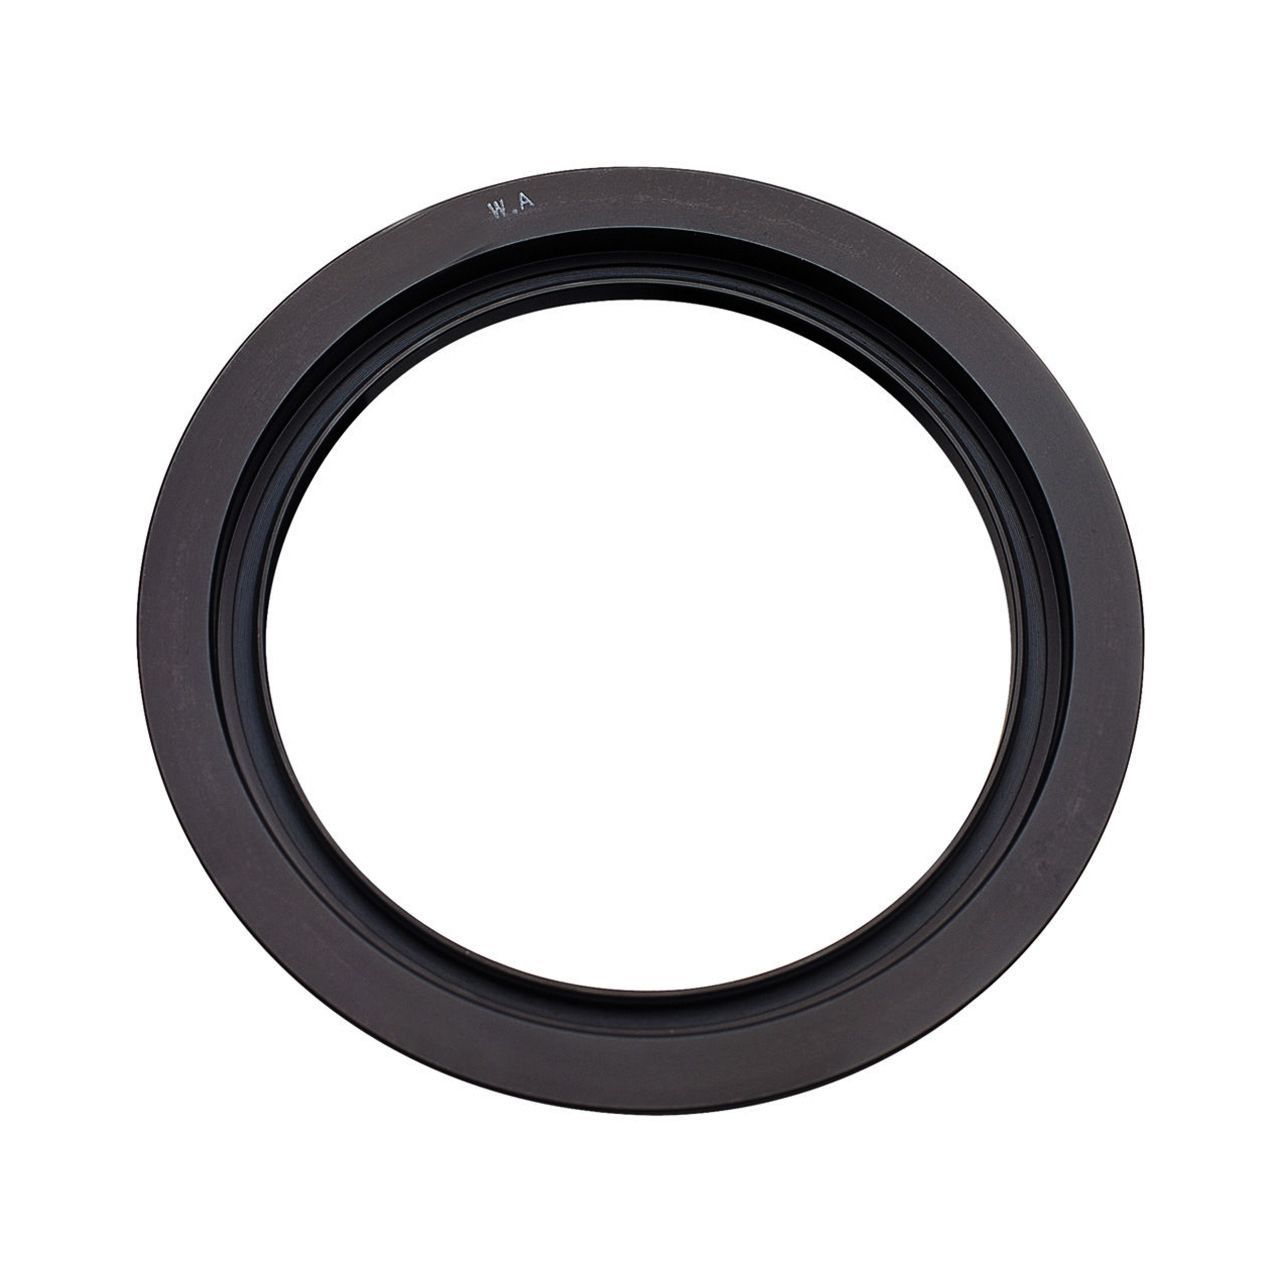 LEE Filters Wide Angle Adapter Ring 55Mm